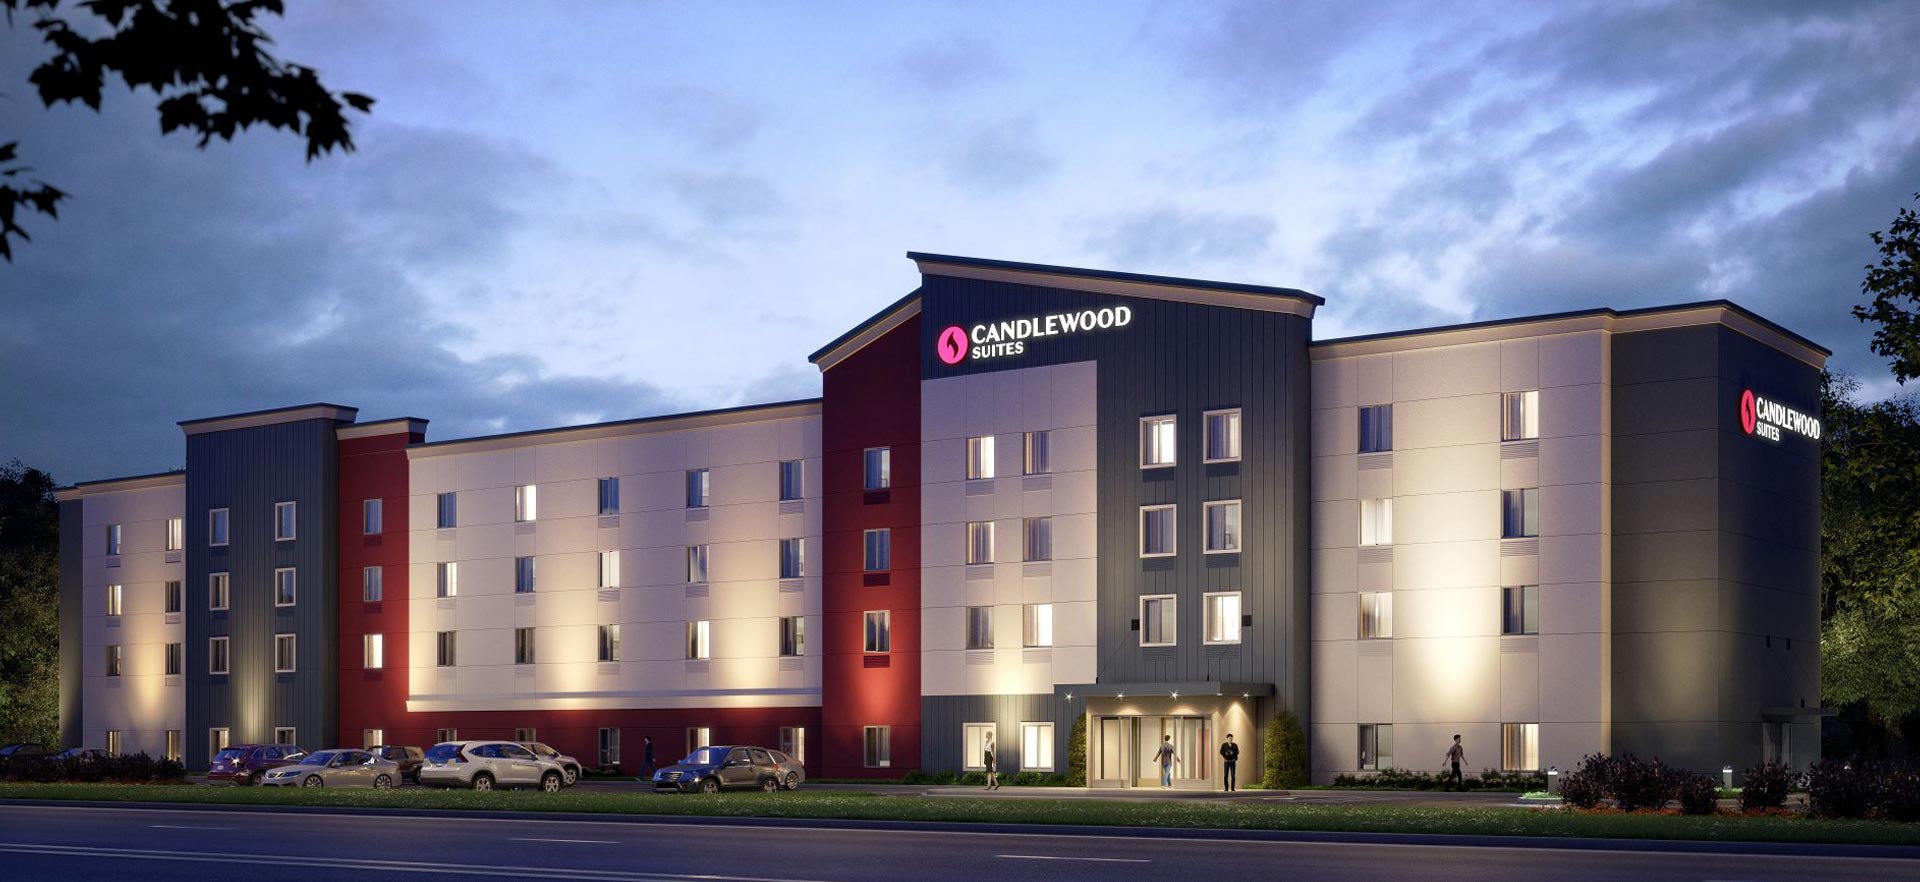 Candlewood Suites – Louisville, KY